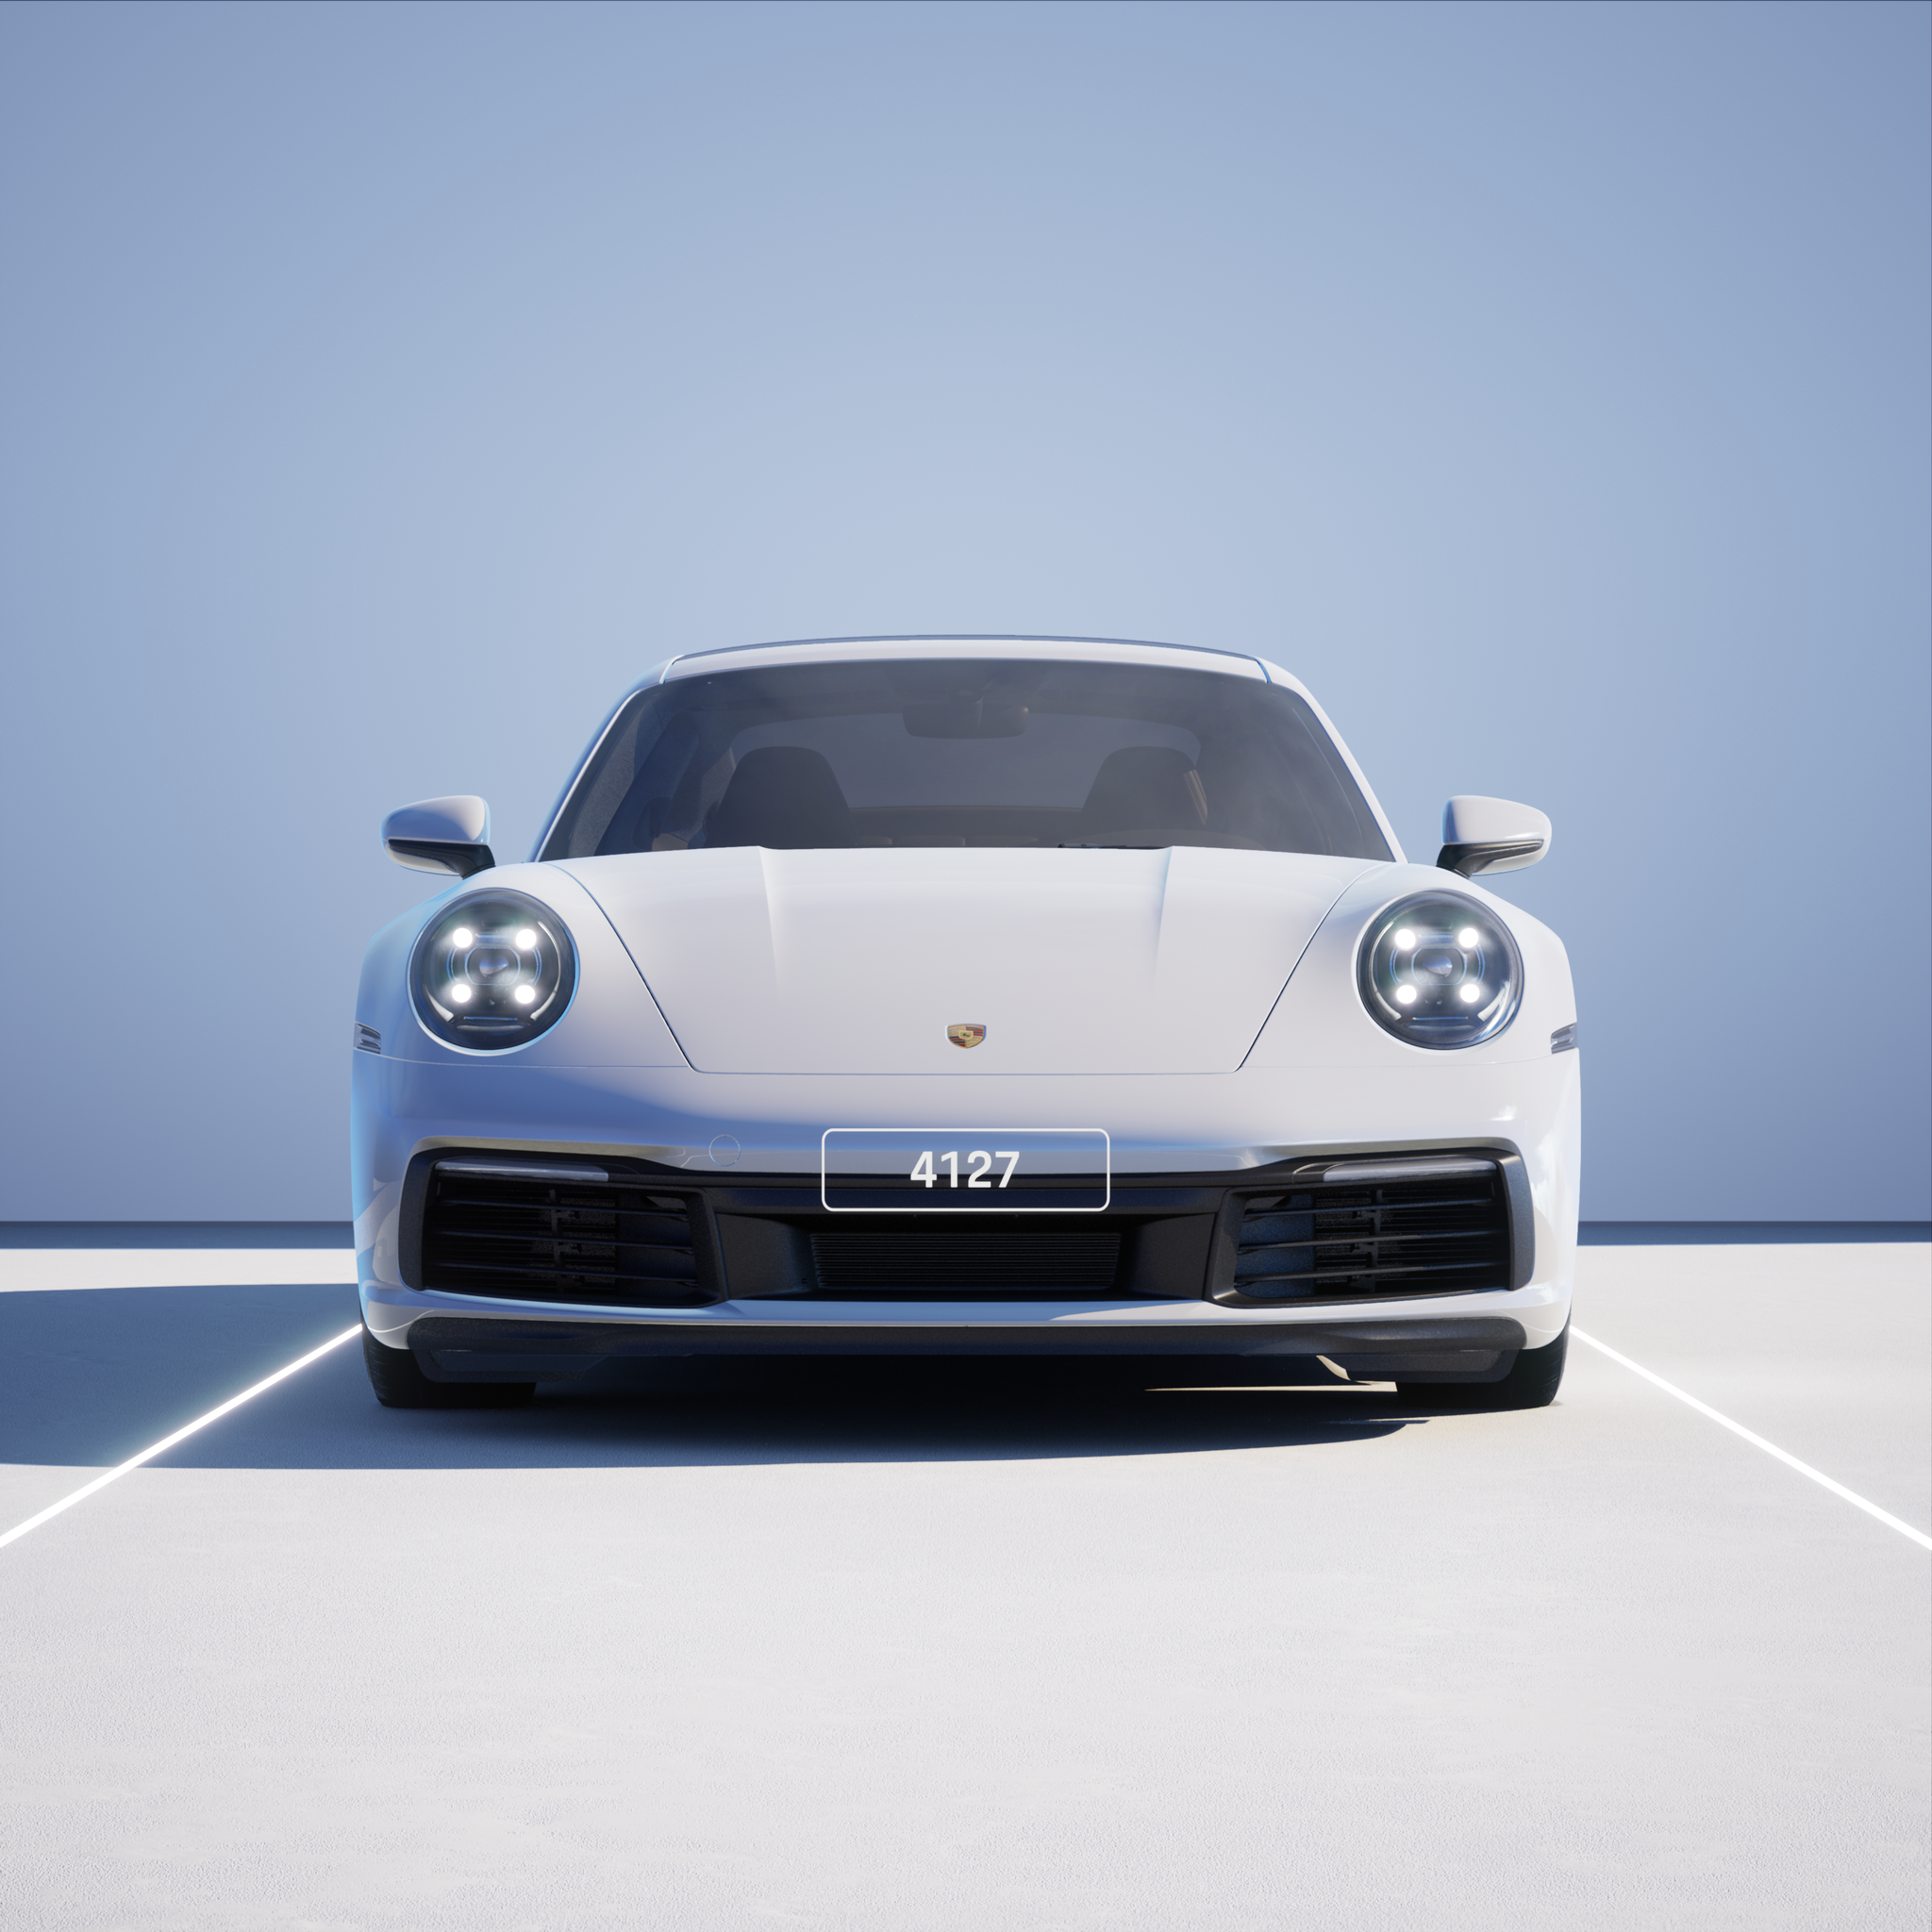 The PORSCHΞ 911 4127 image in phase